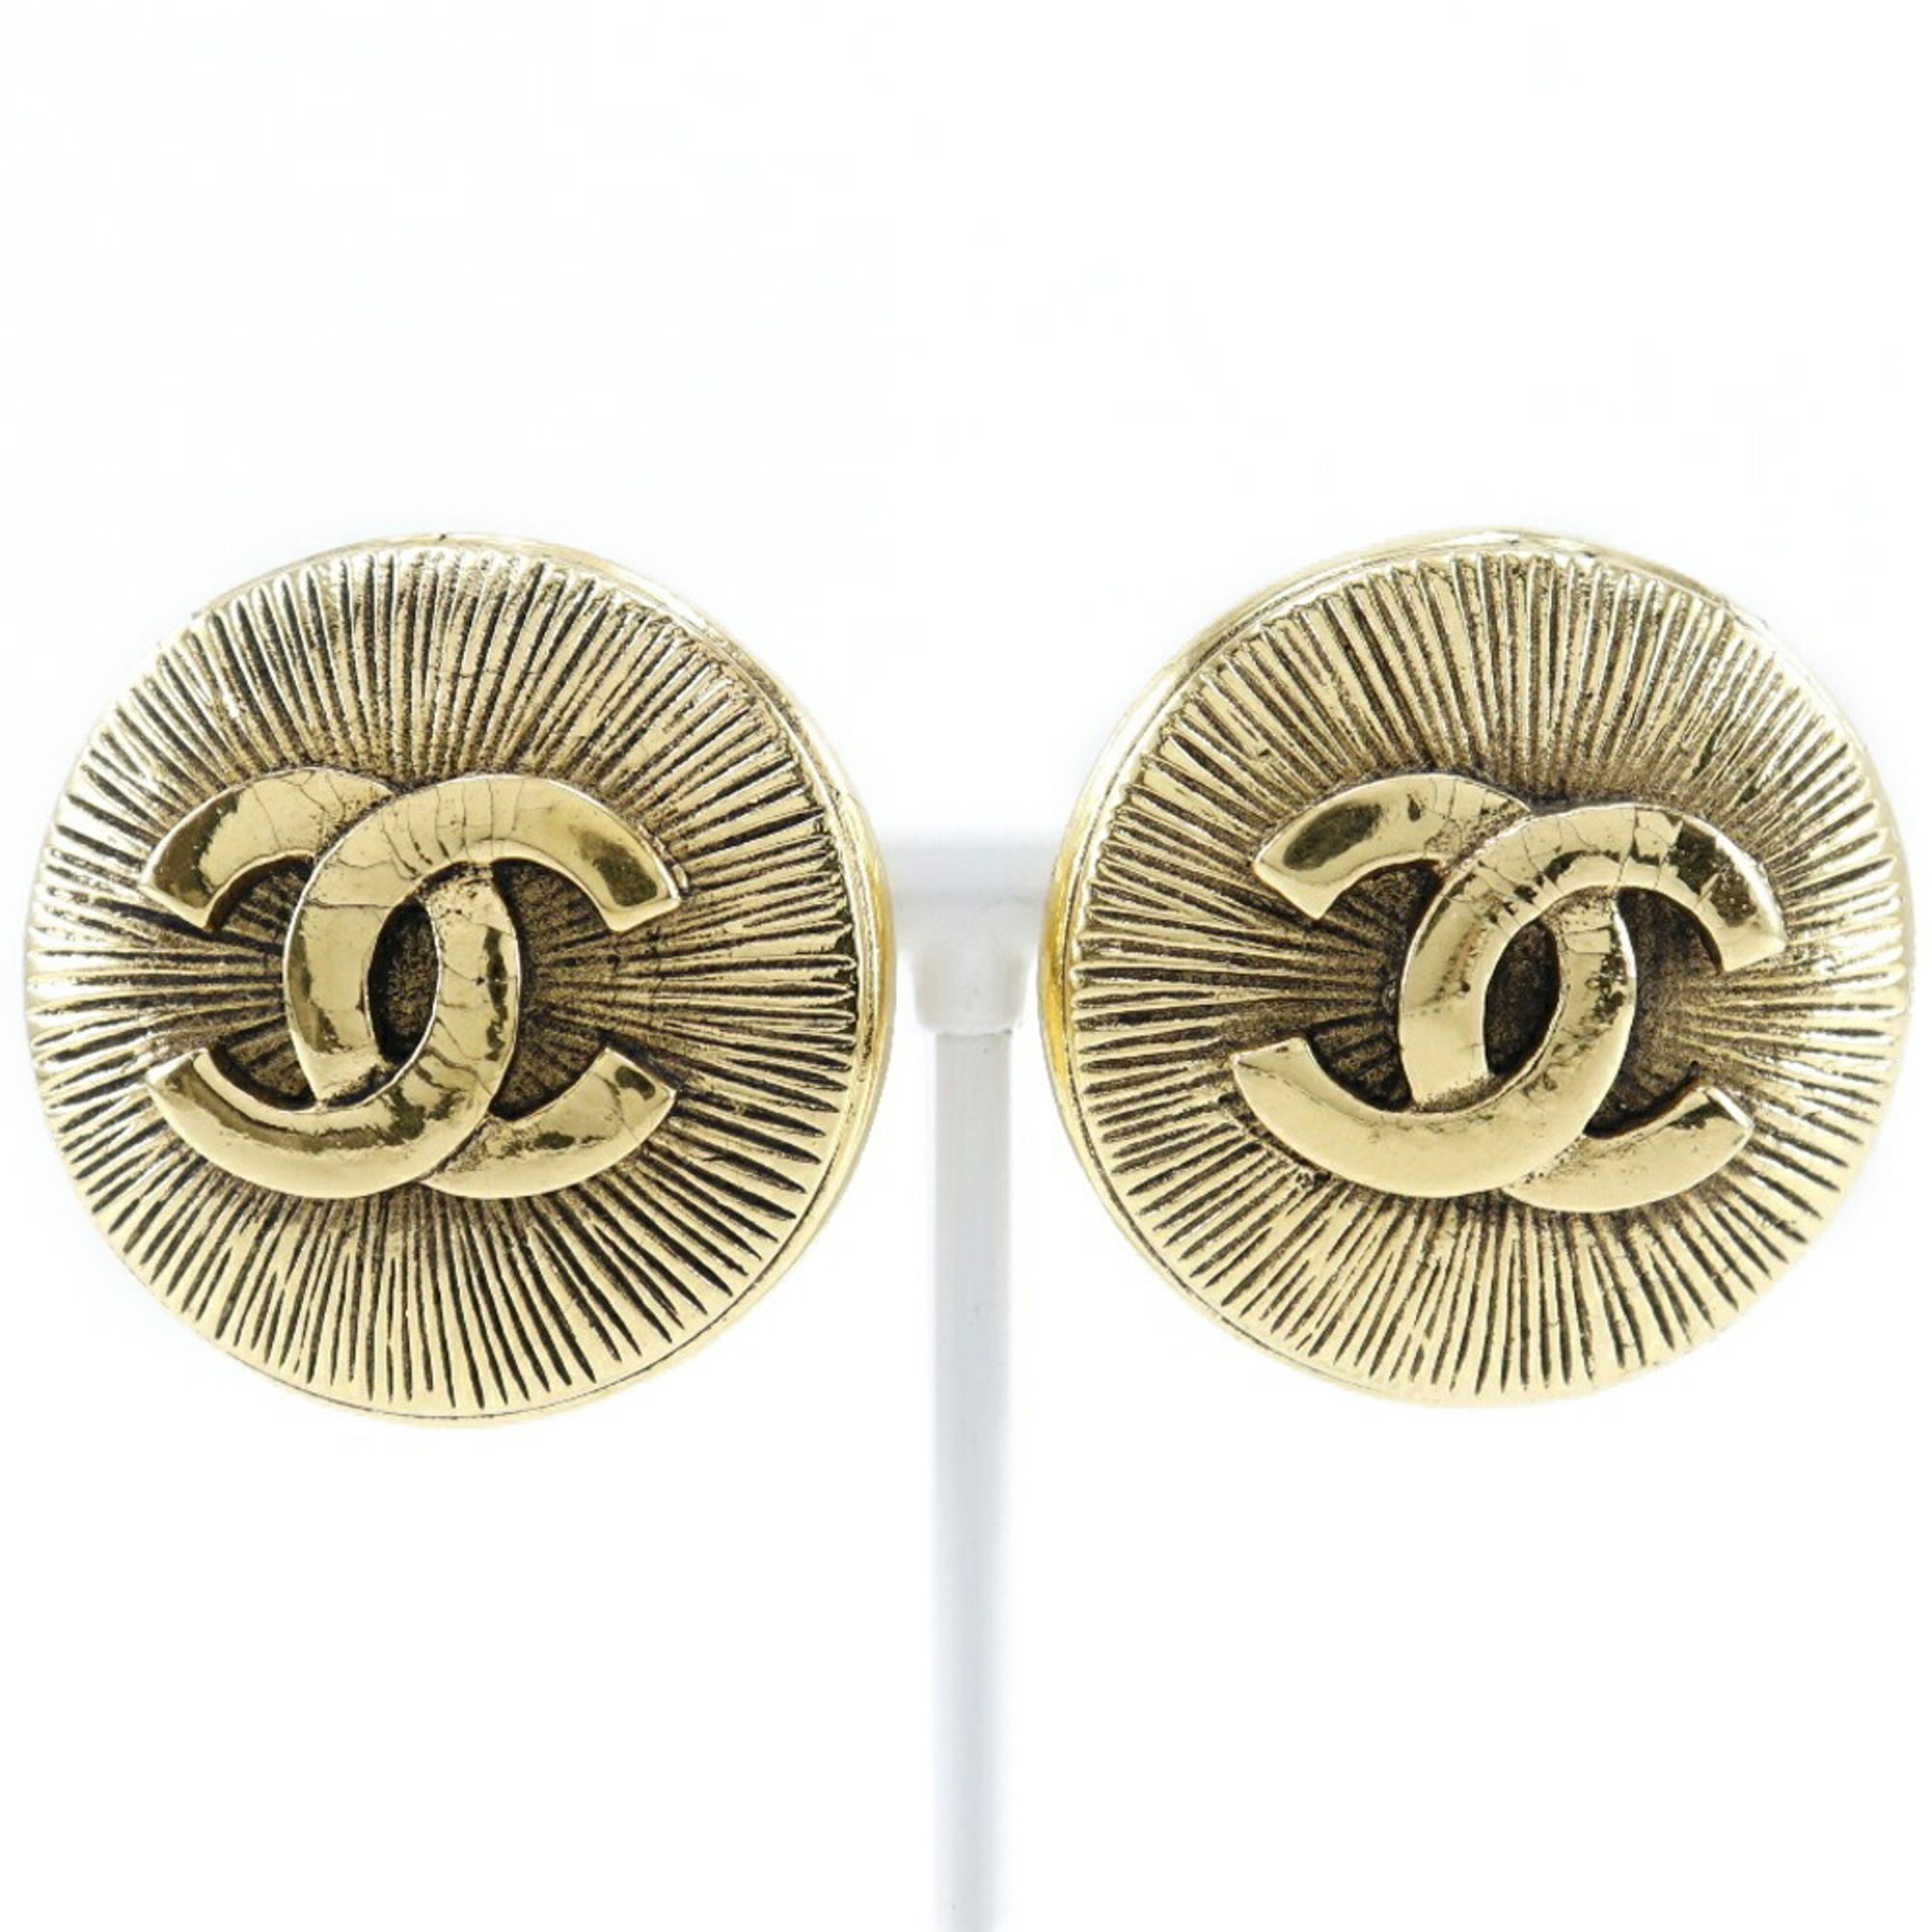 Chanel CHANEL COCO Mark earrings gold plated ladies